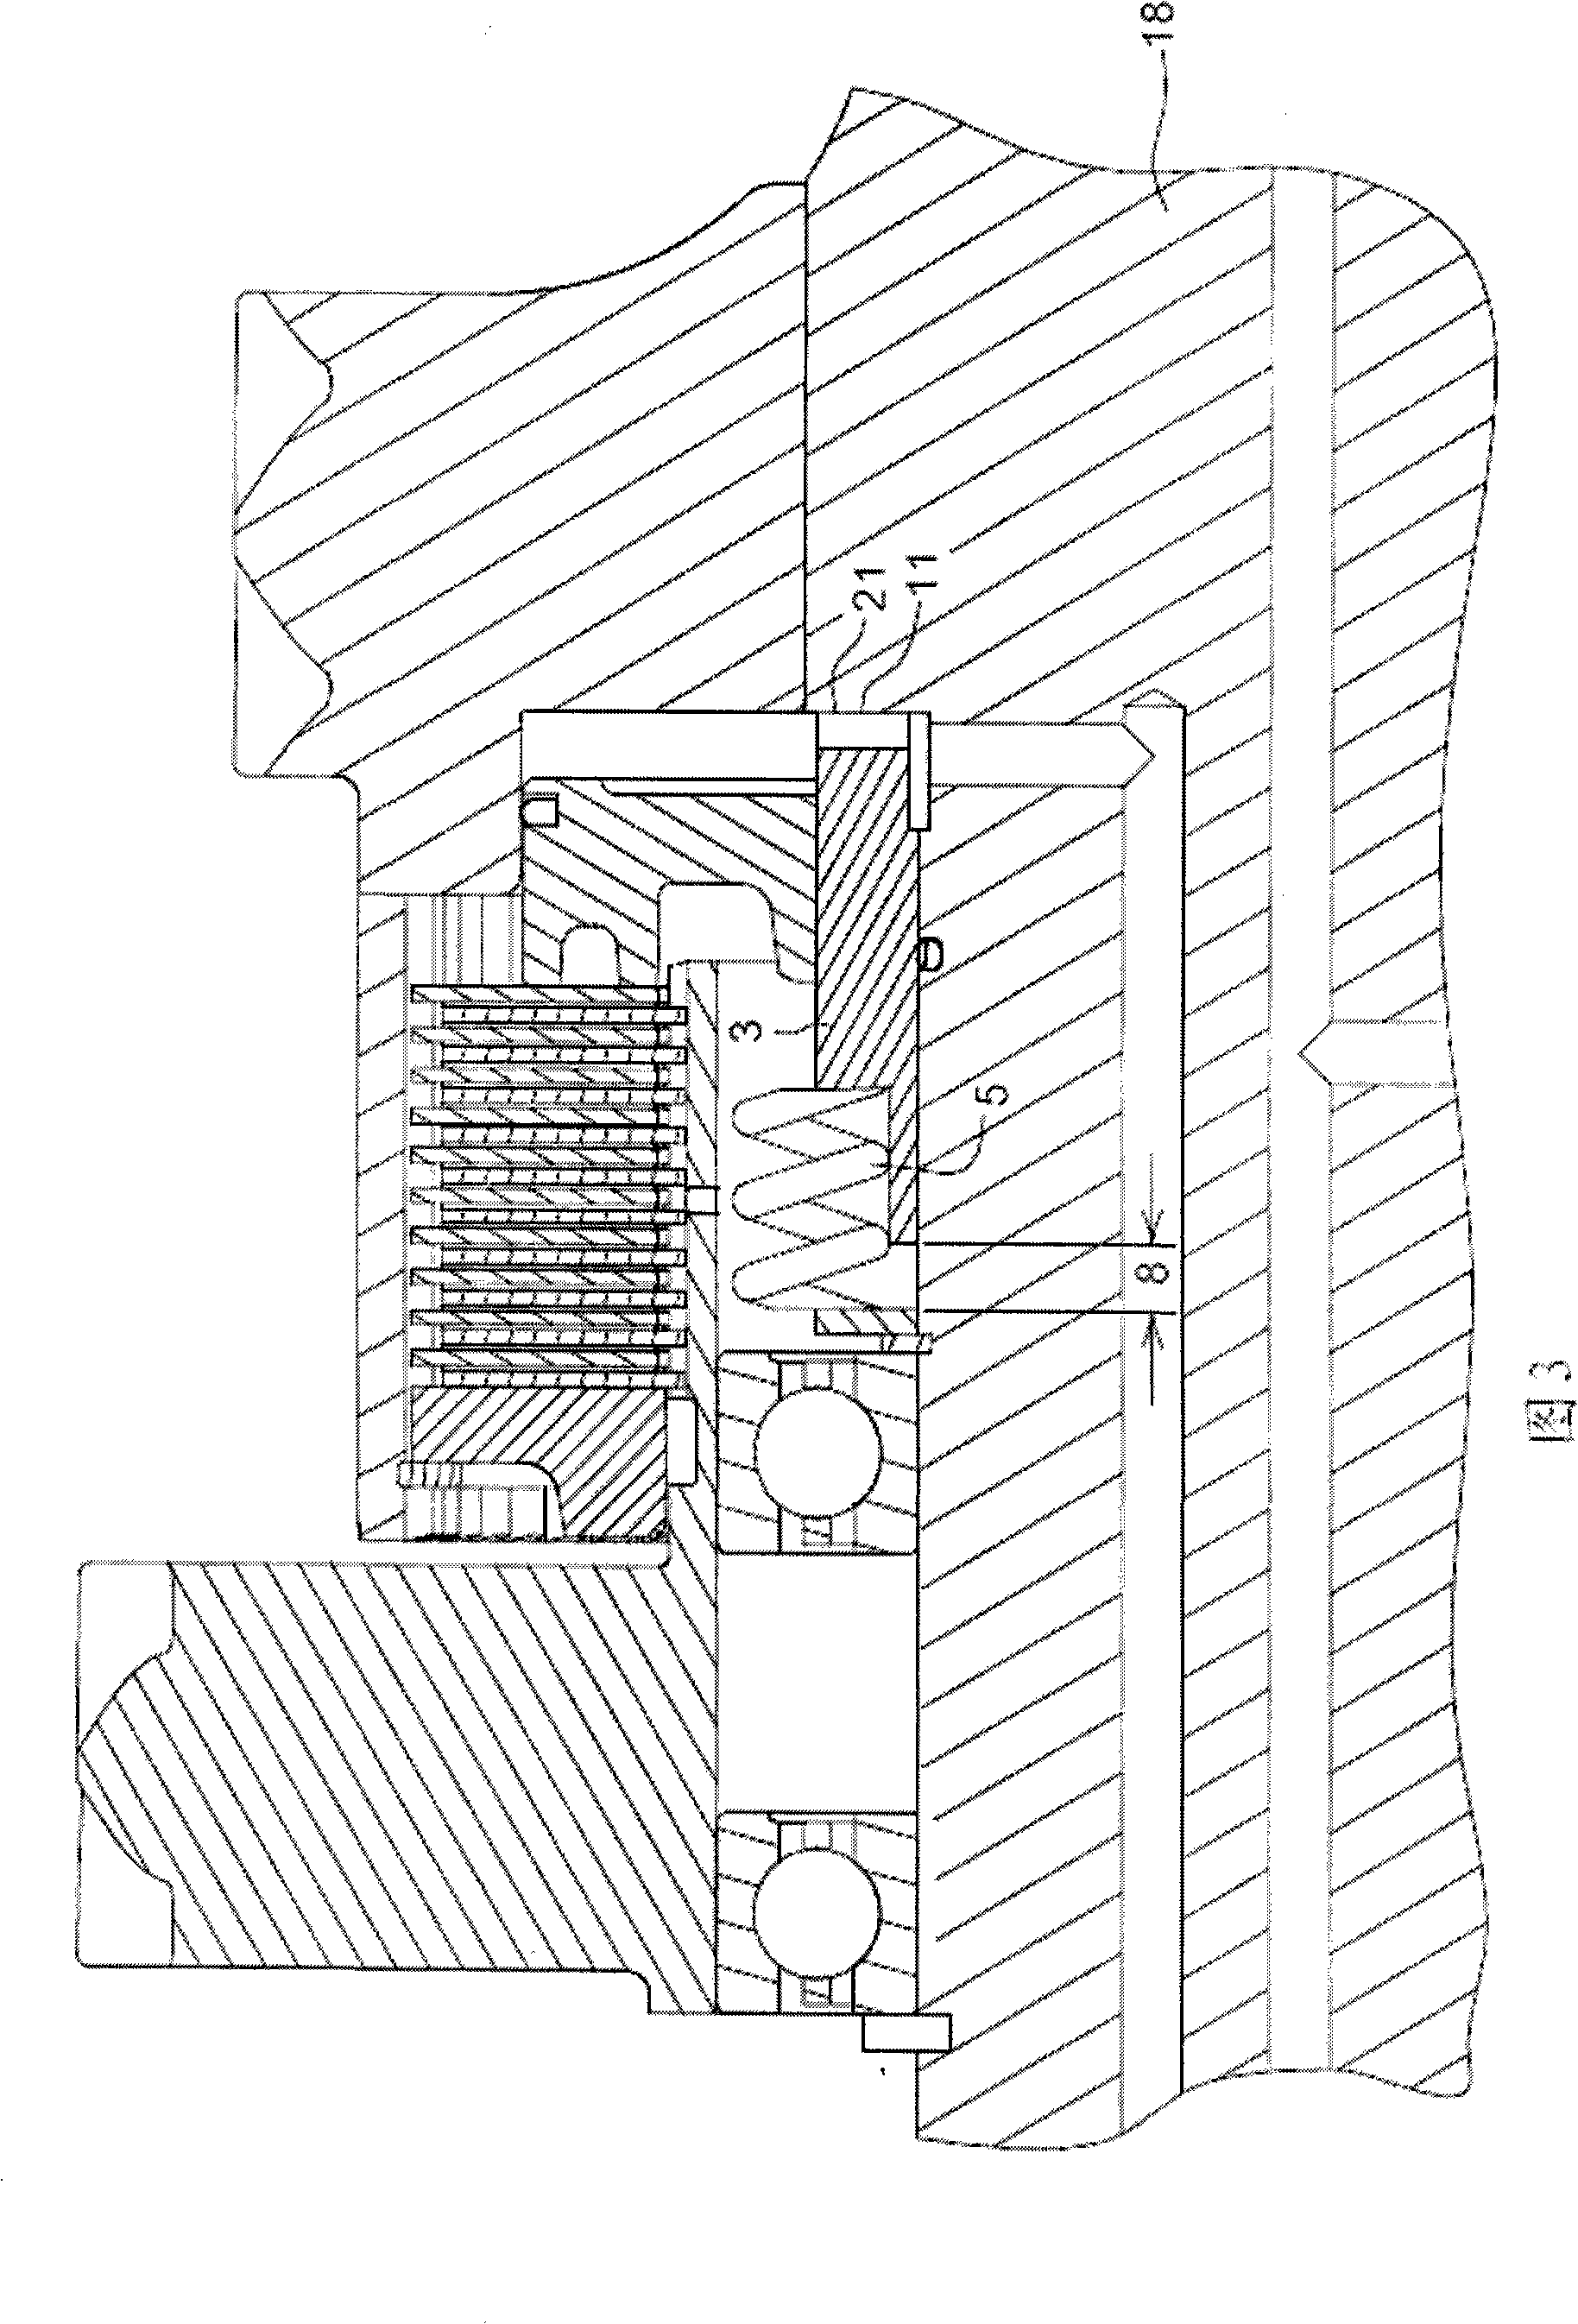 Powershift transmission clutch system with a predetermined running clearance